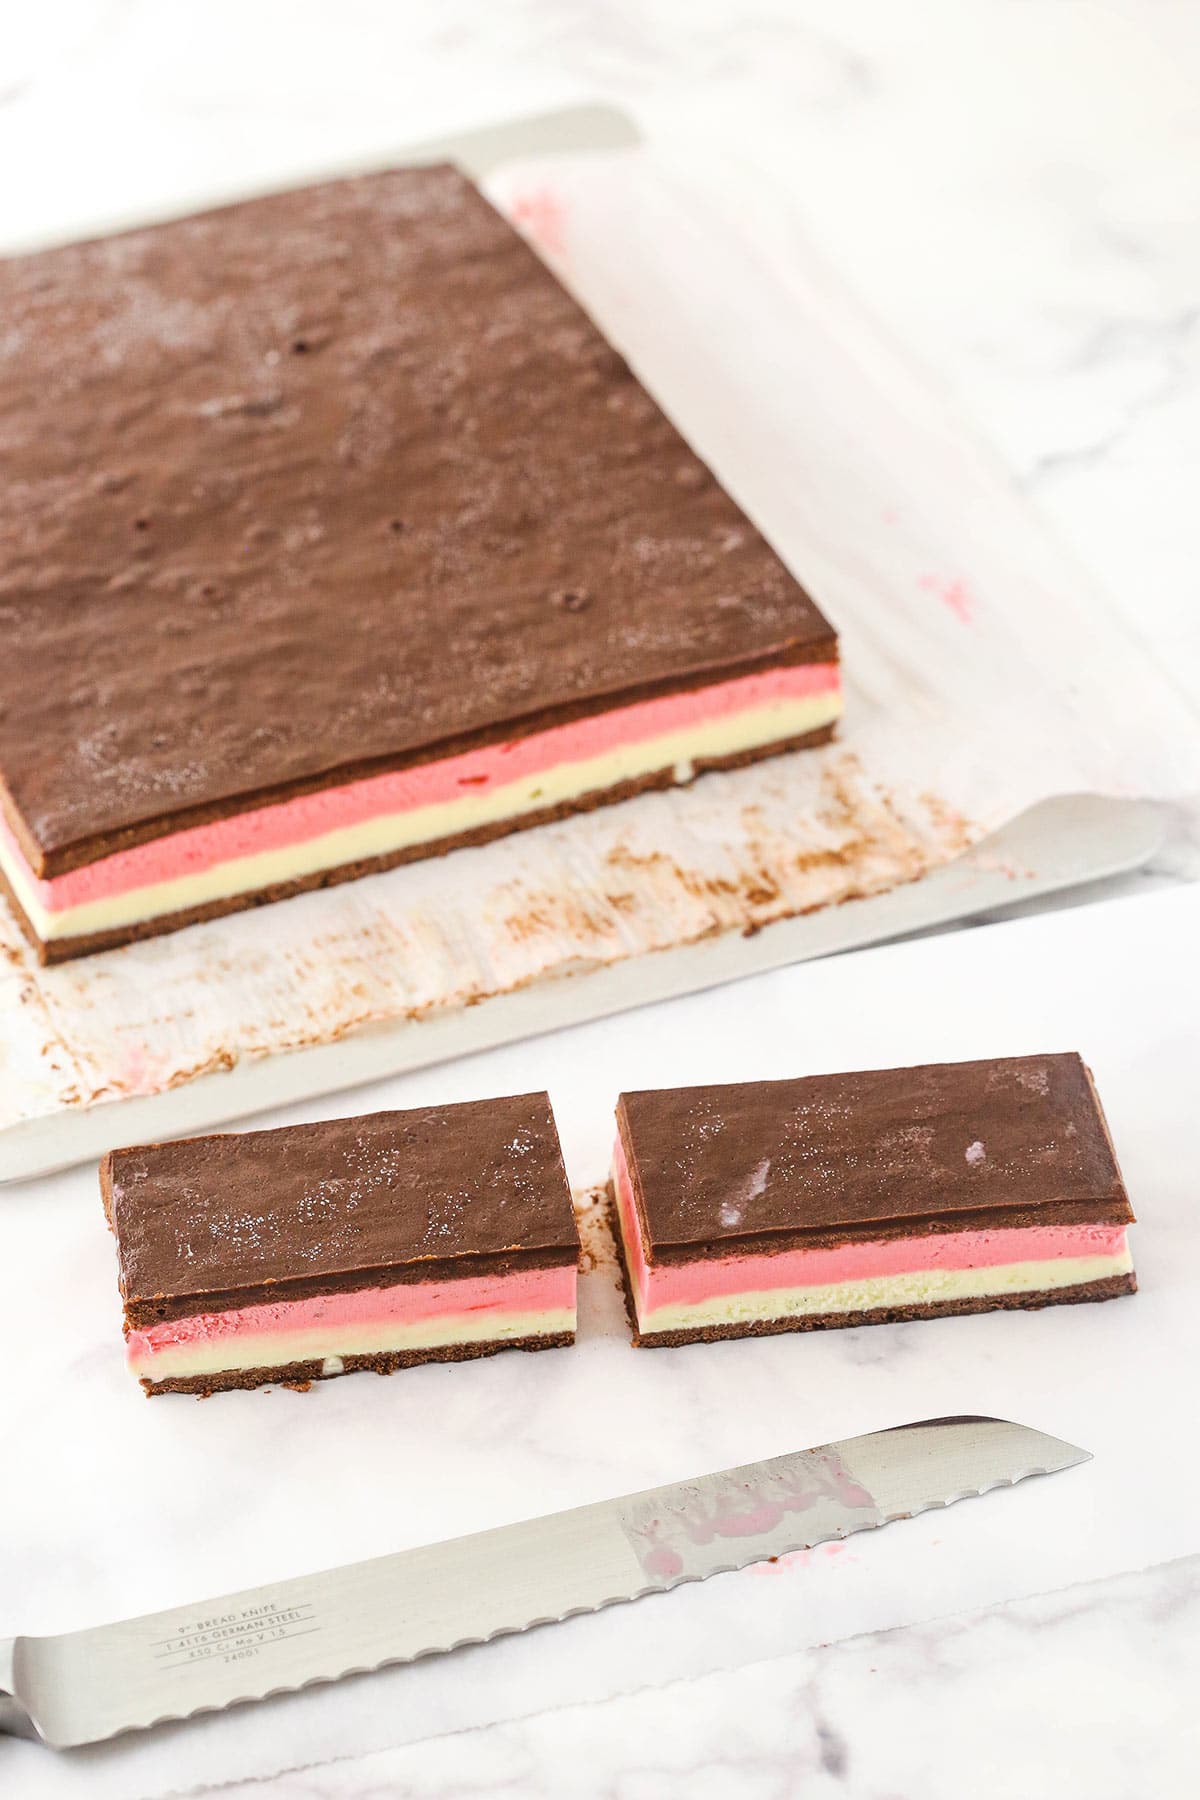 A batch of Neapolitan ice cream sandwiches on a lined pan with two rectangles cut off and a sharp knife beside them